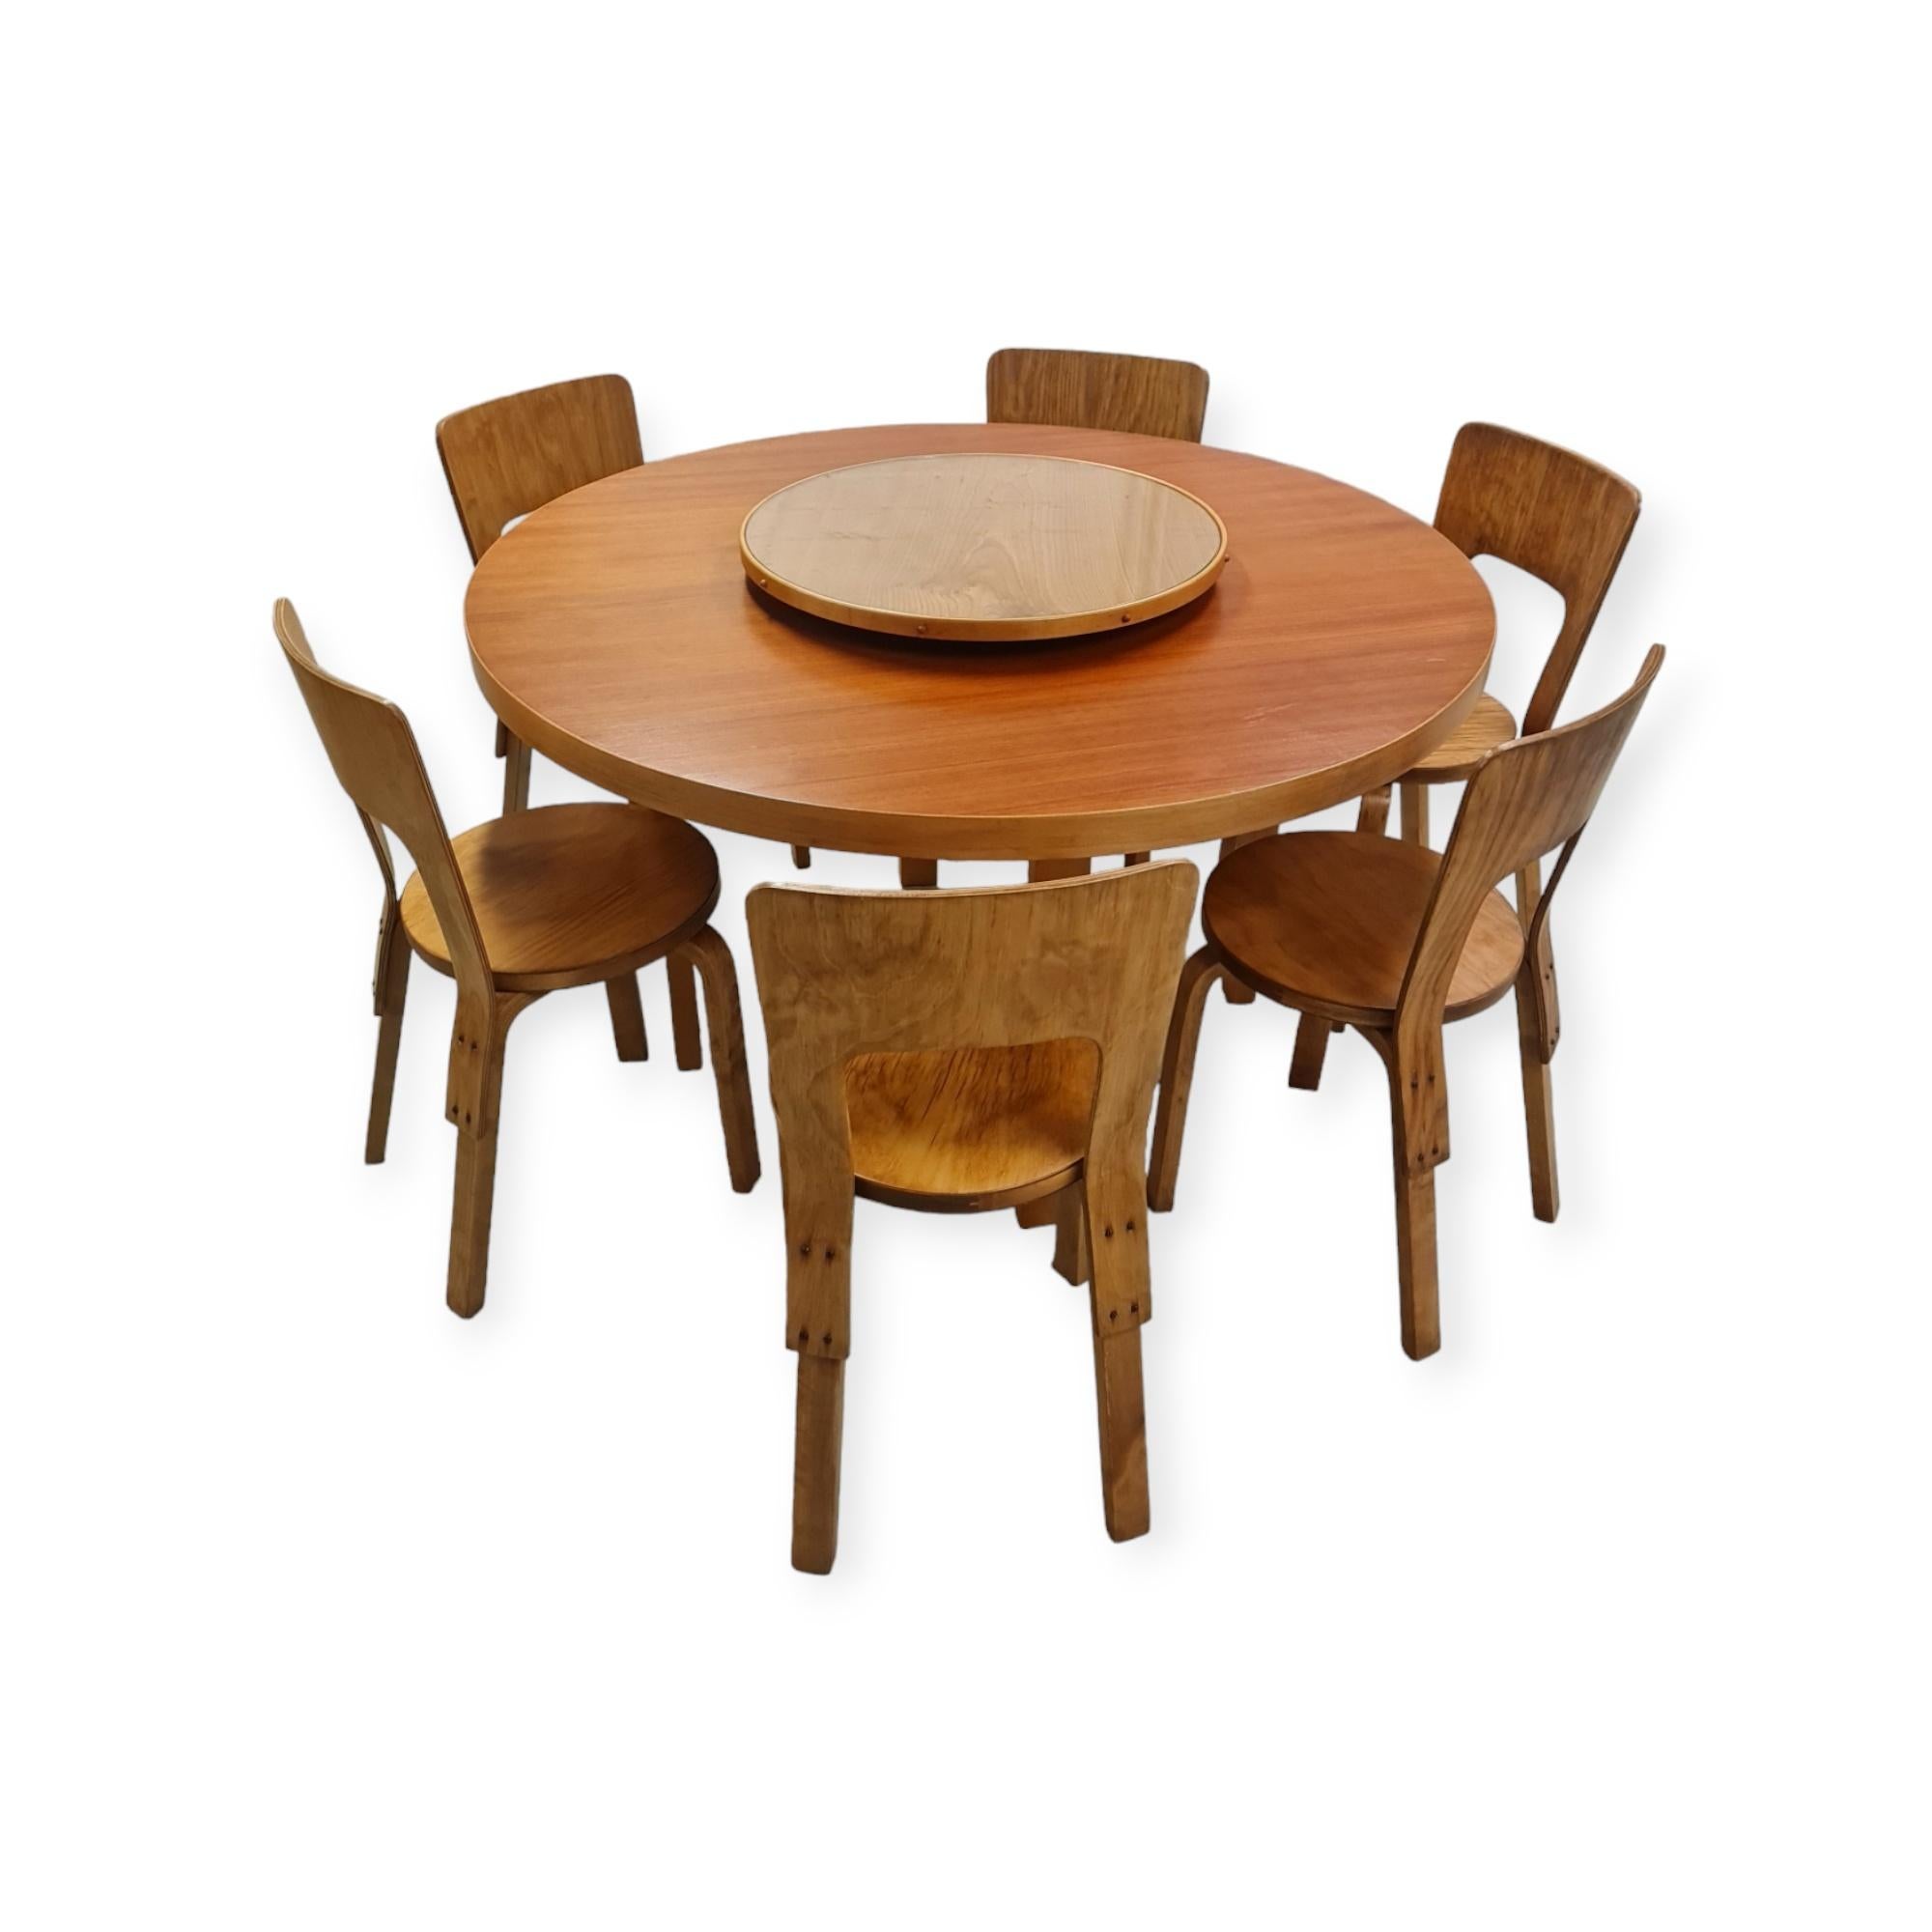 Scandinavian Modern Alvar Aalto Dinning Set with Lazy Susan and 6 Model 66 chairs, 1940s For Sale